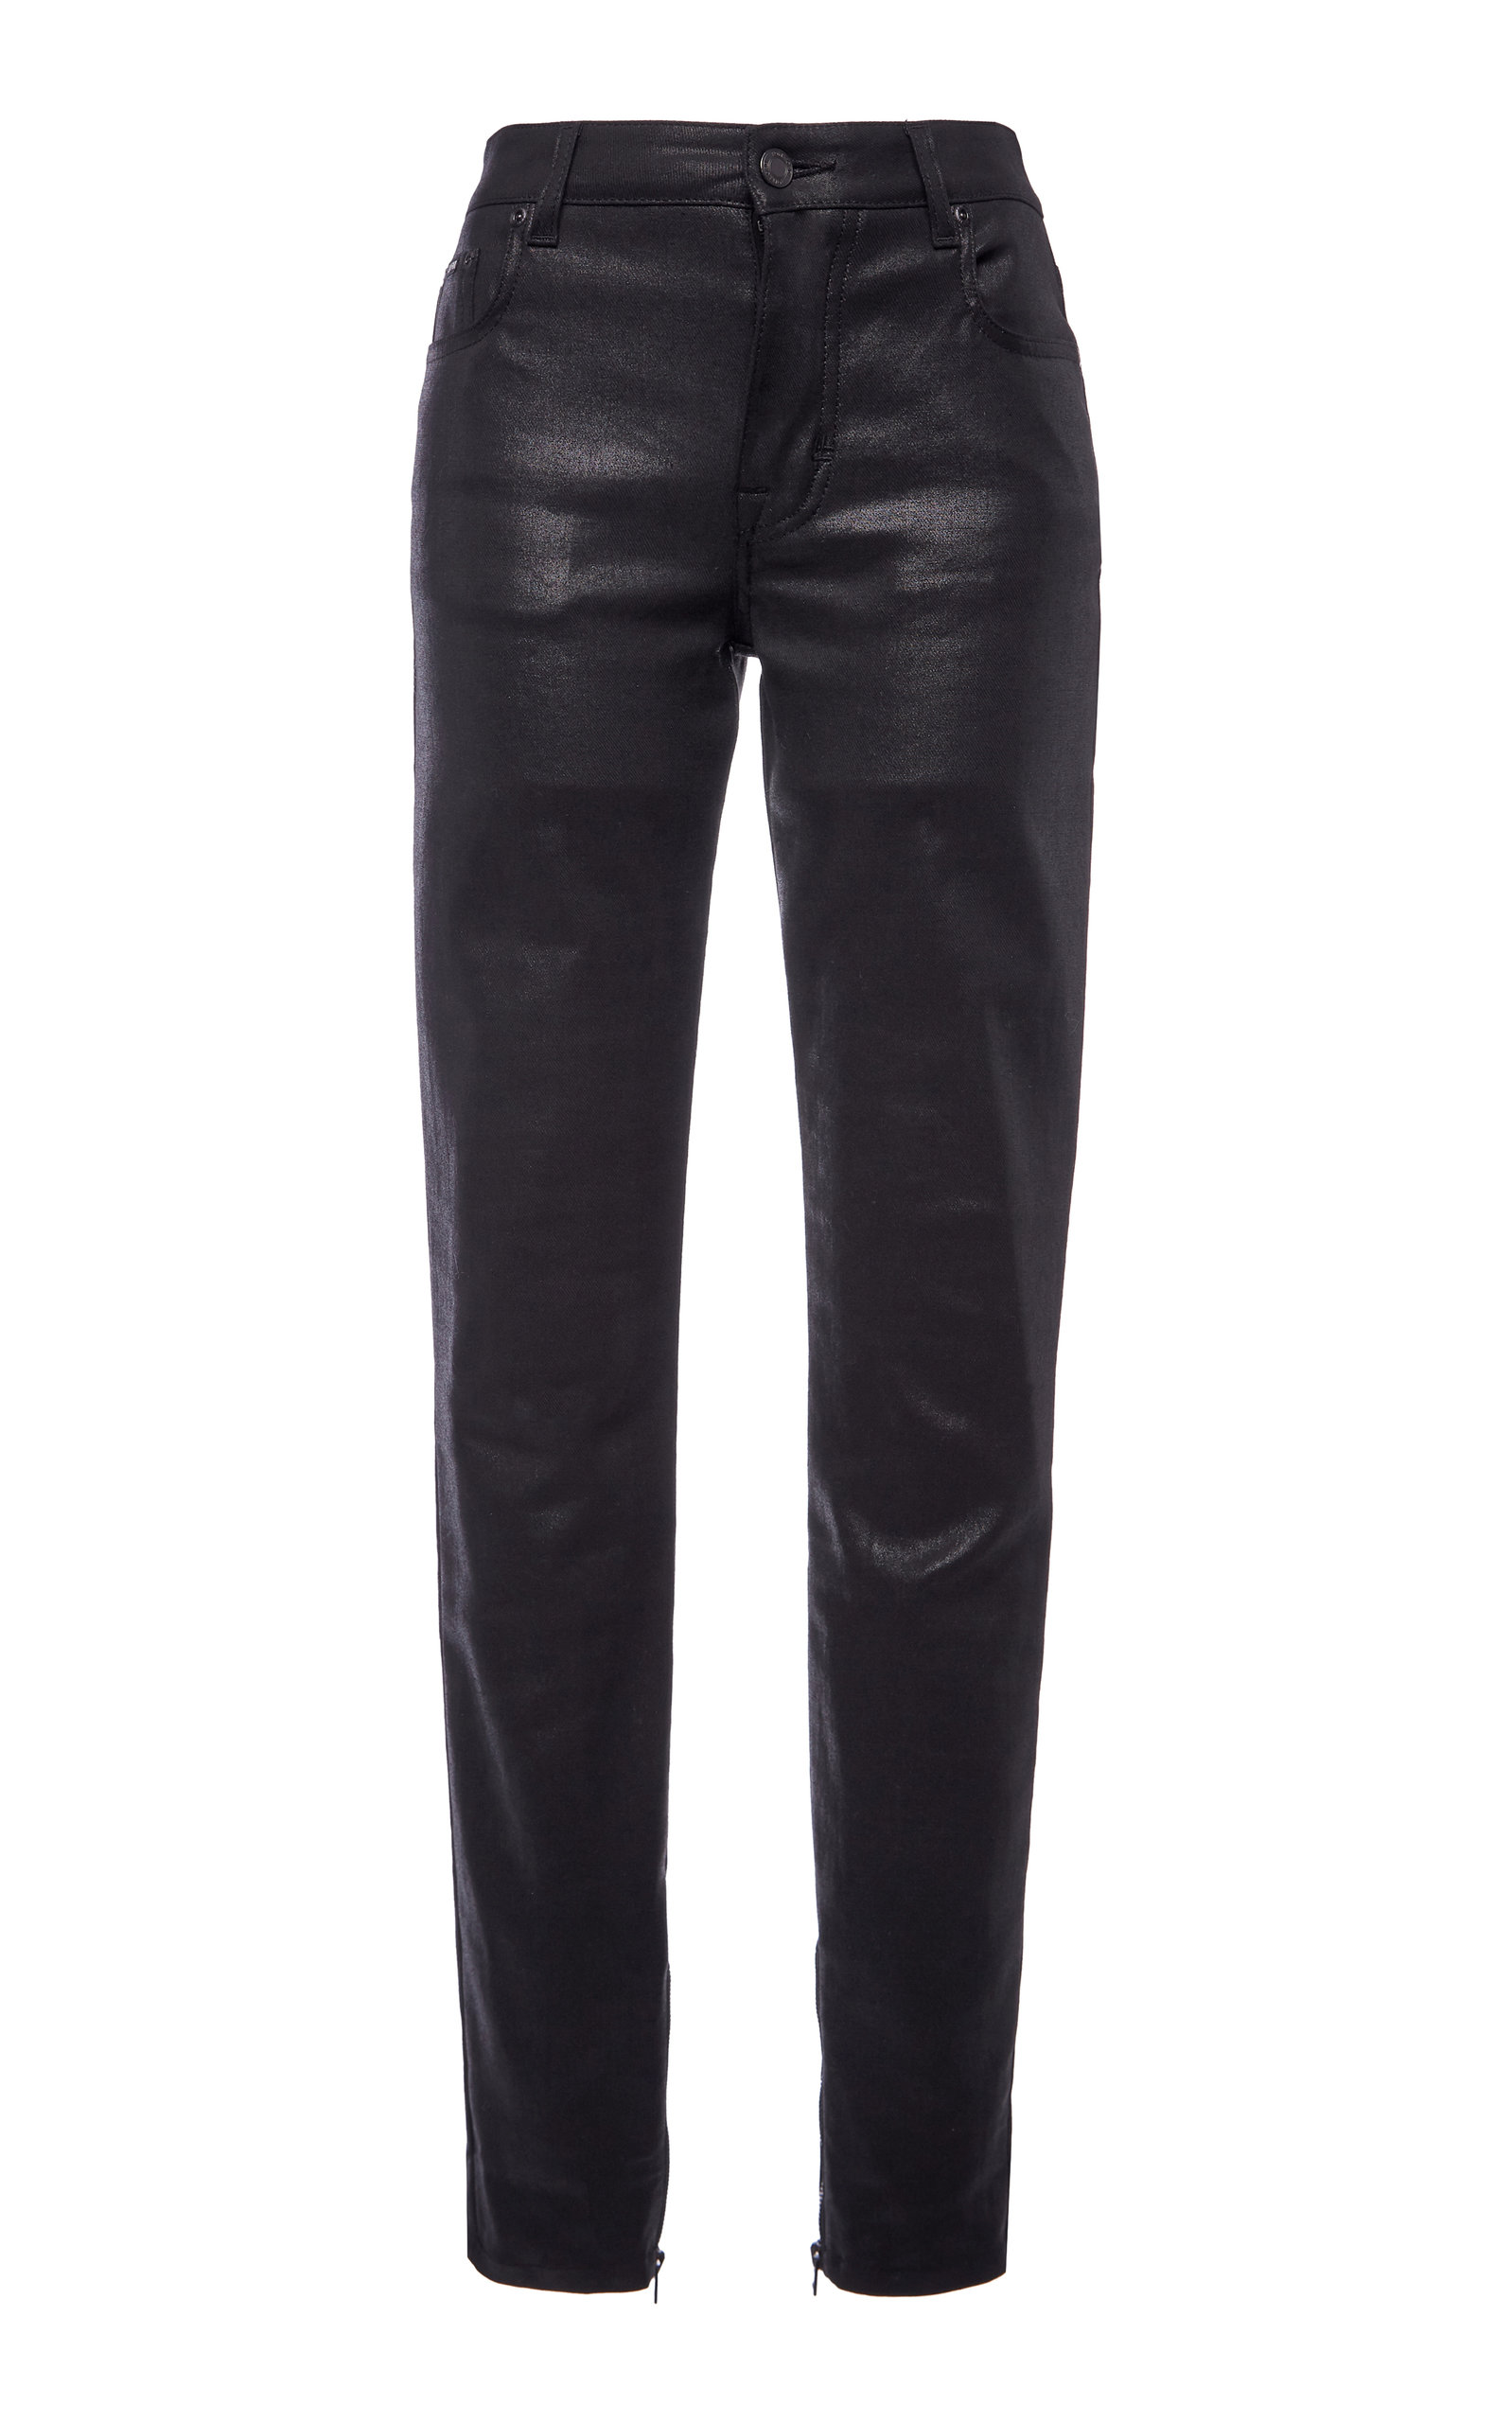 TOM FORD WOMEN'S COATED STRETCH LOW-RISE SKINNY JEANS